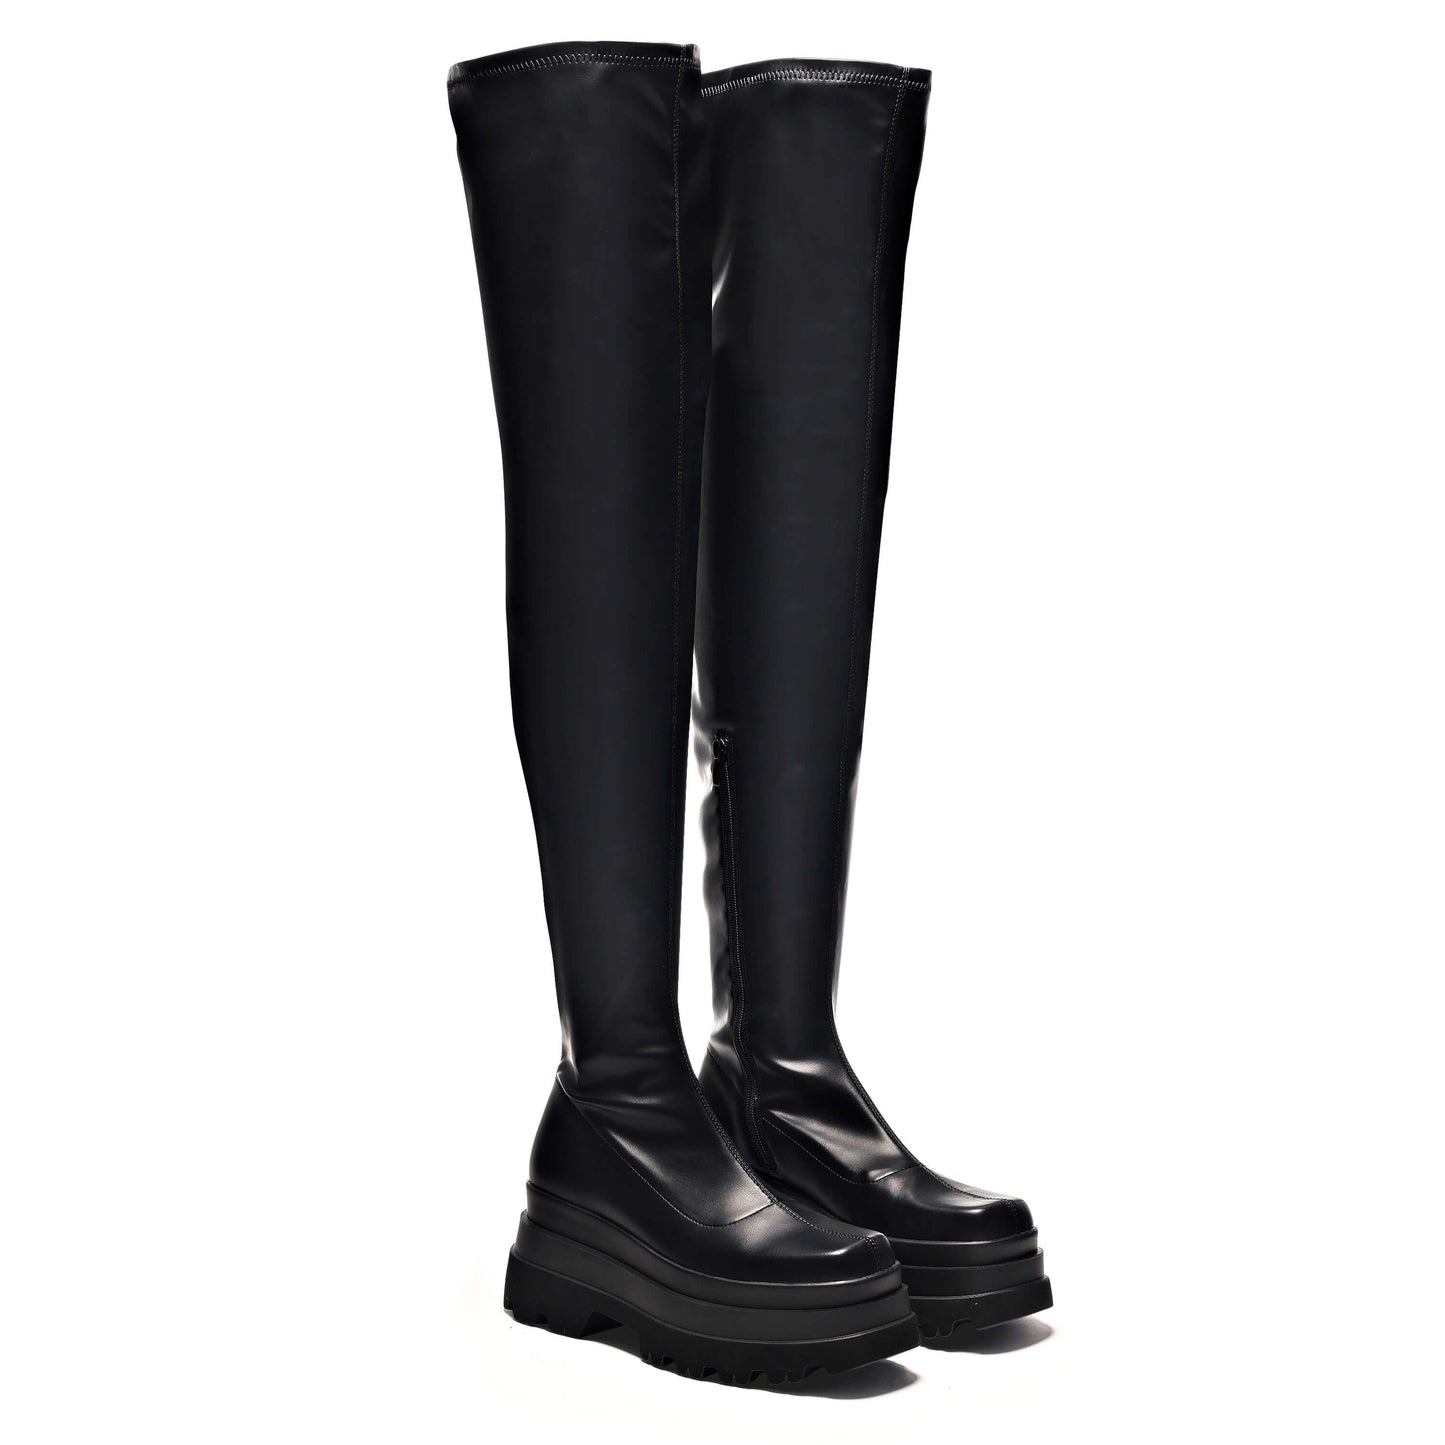 The Elevation Plus Size Thigh High Boots - Long Boots - KOI Footwear - Black - Three-Quarter View